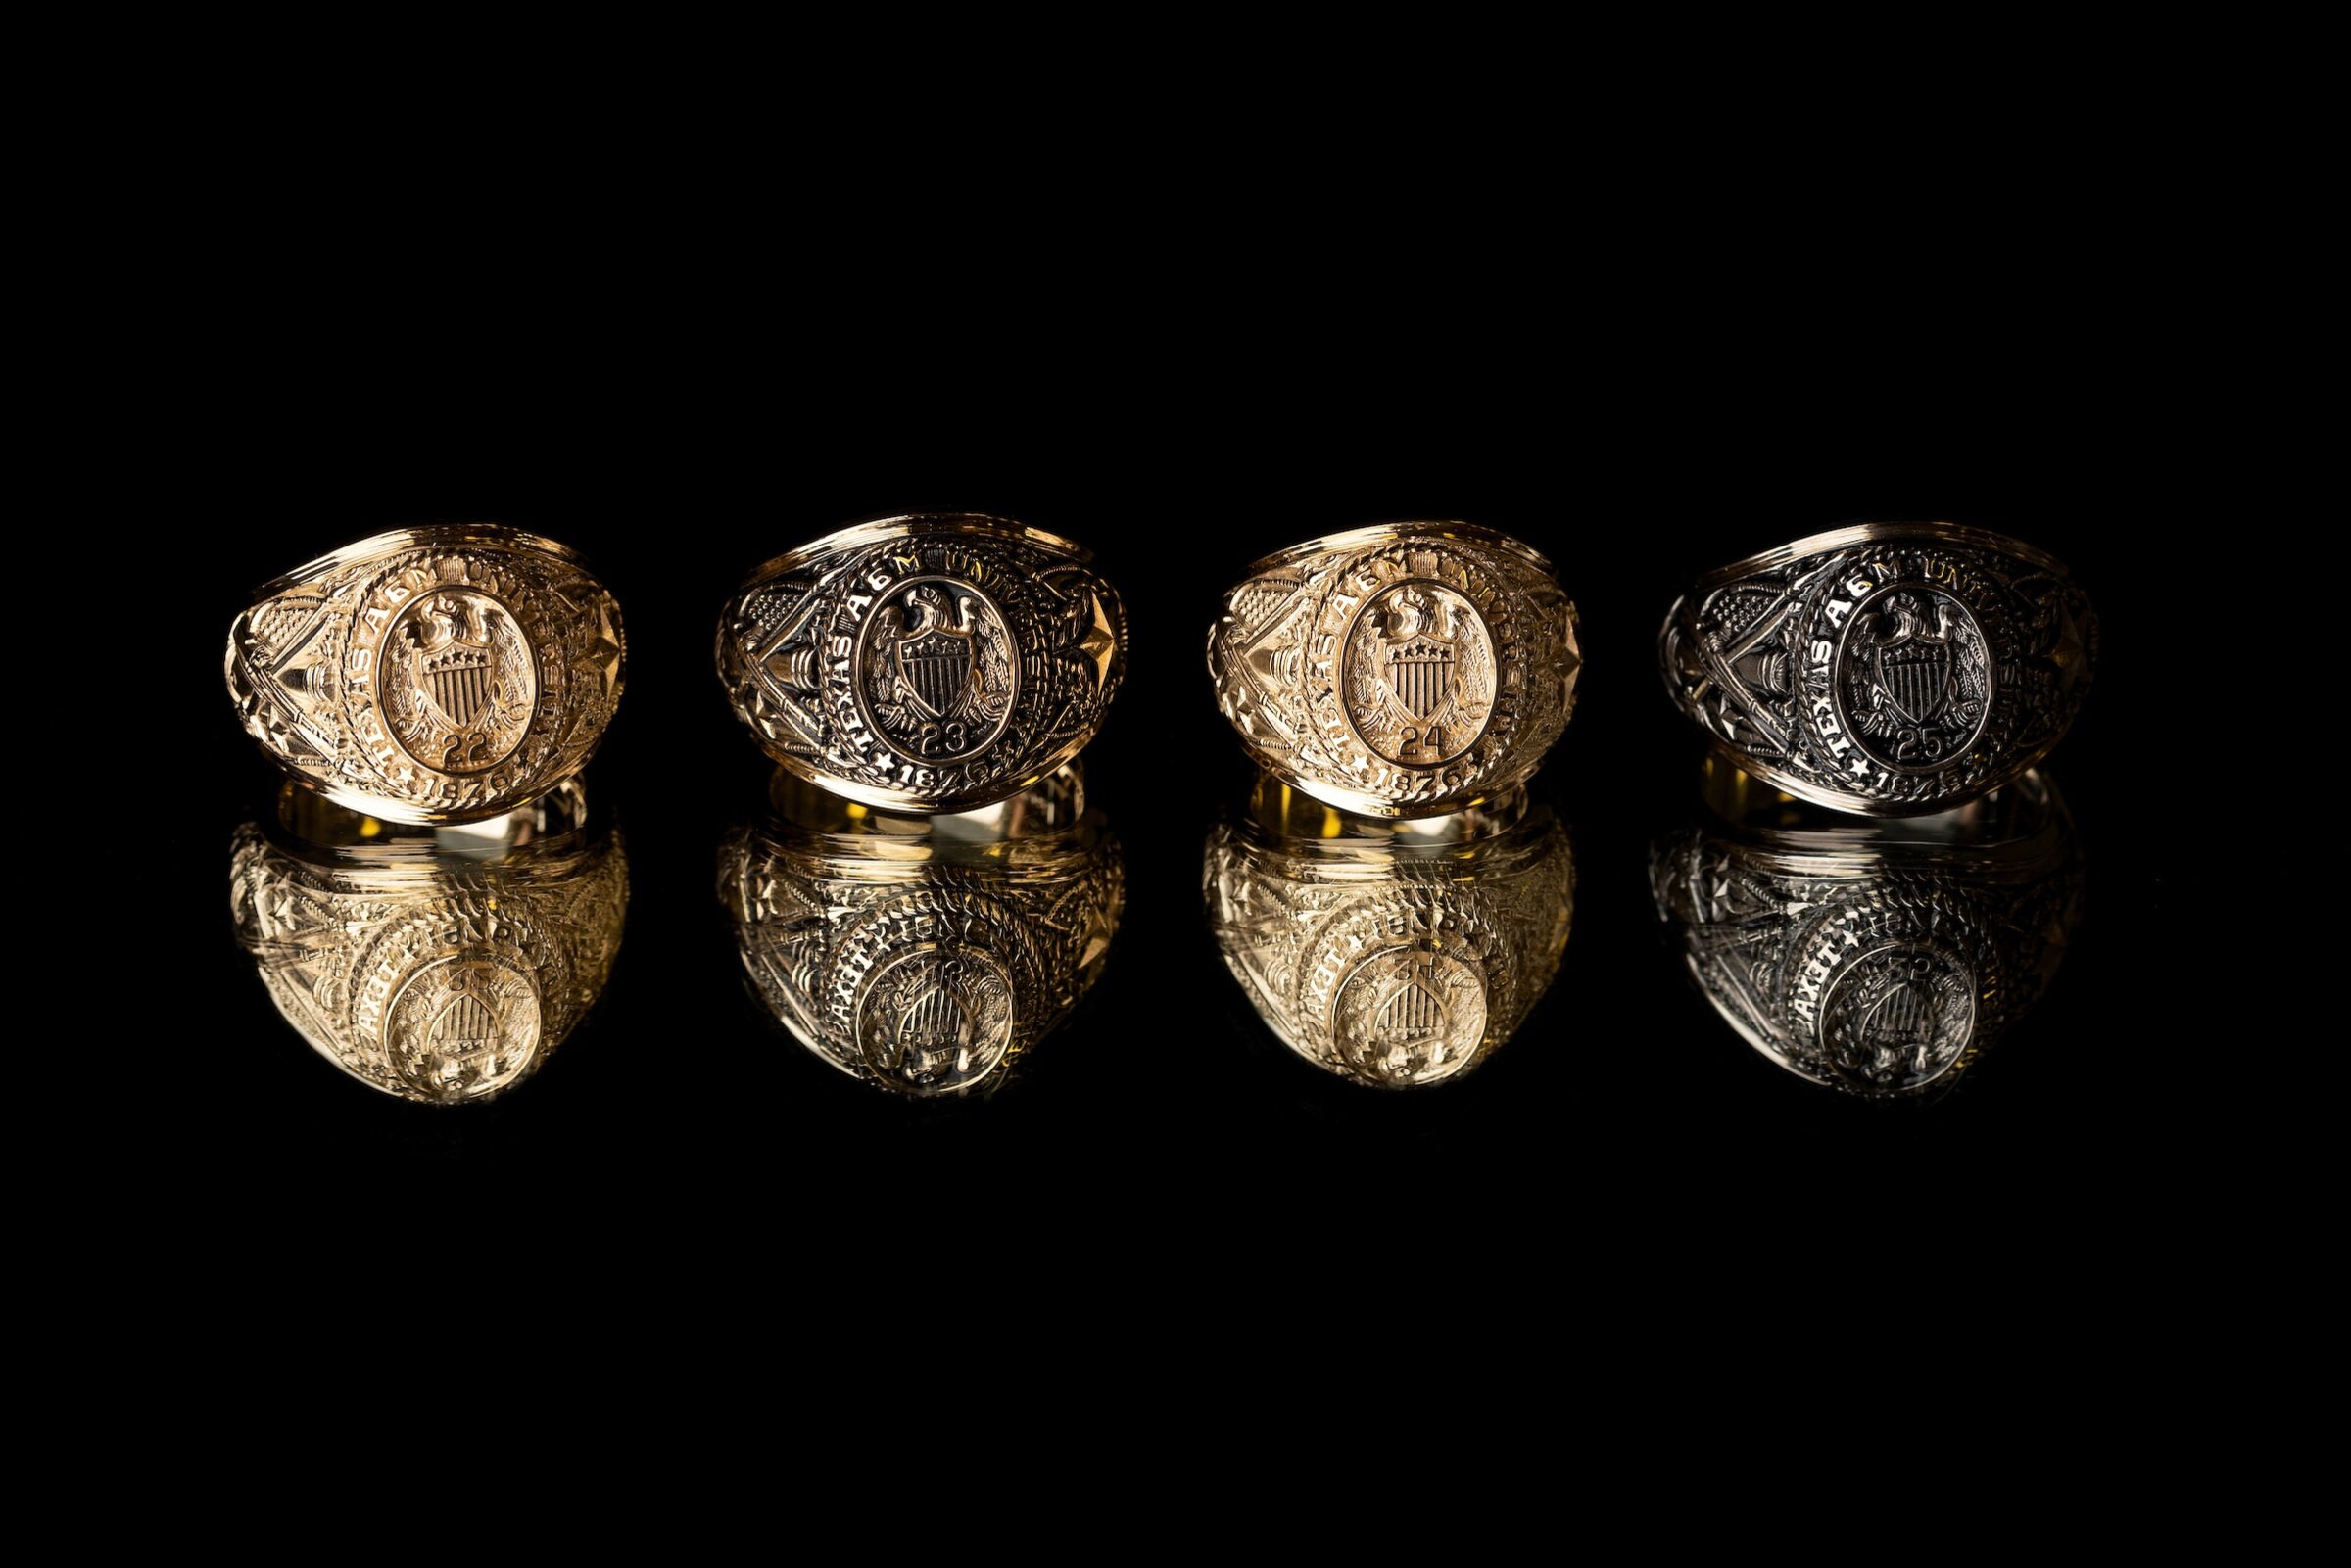 Four Aggie Rings sitting on a reflective surface against a black background.